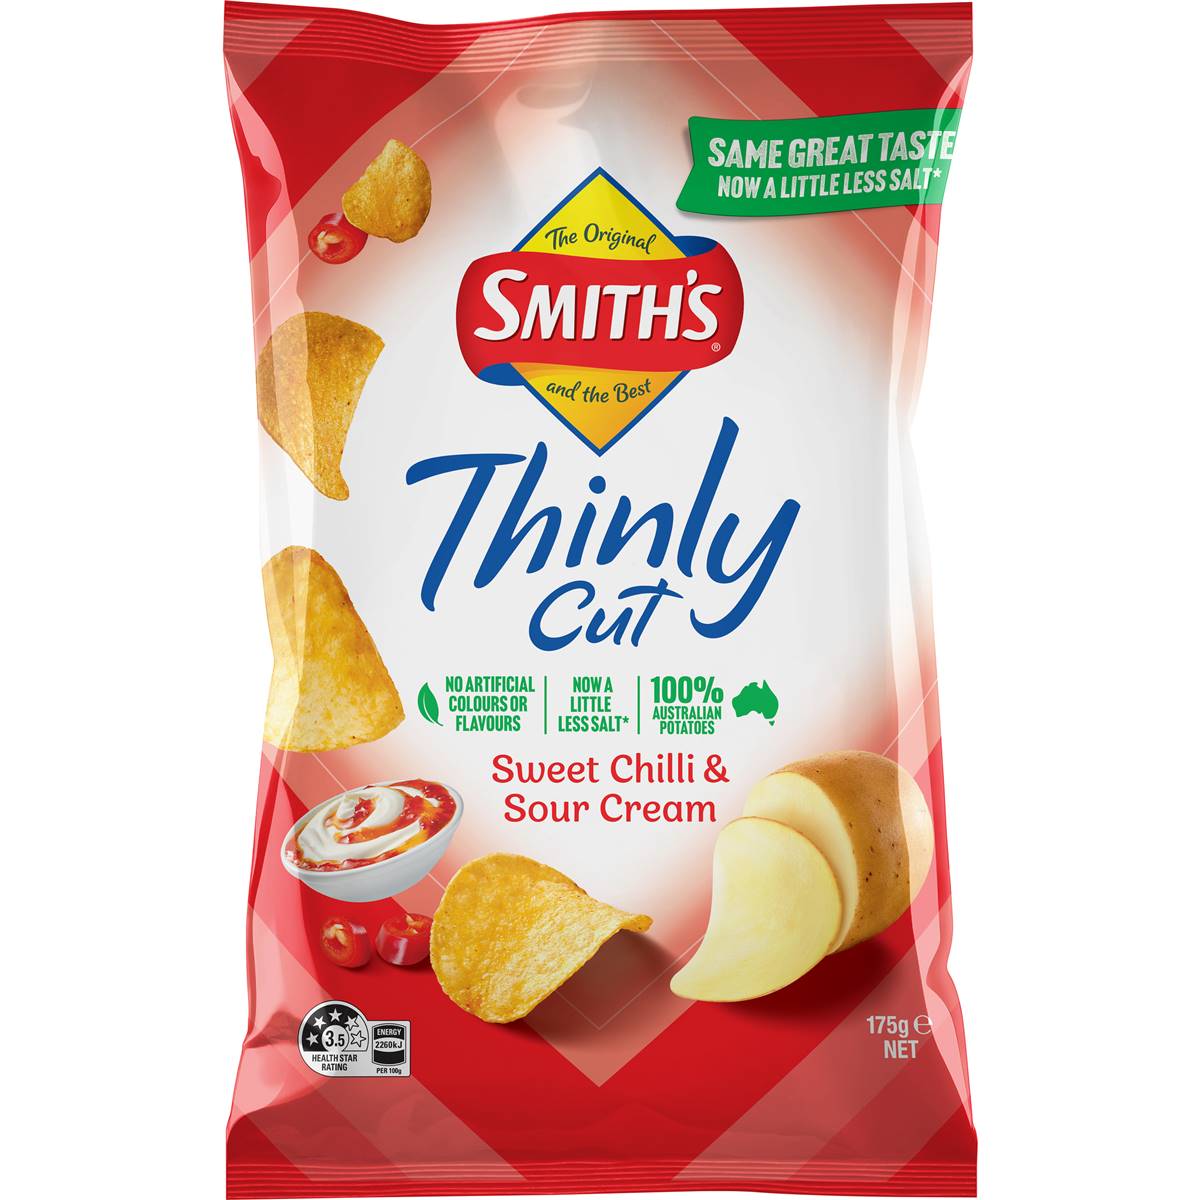 Calories in Smith's Thinly Cut Potato Chips Sweet Chilli & Sour Cream